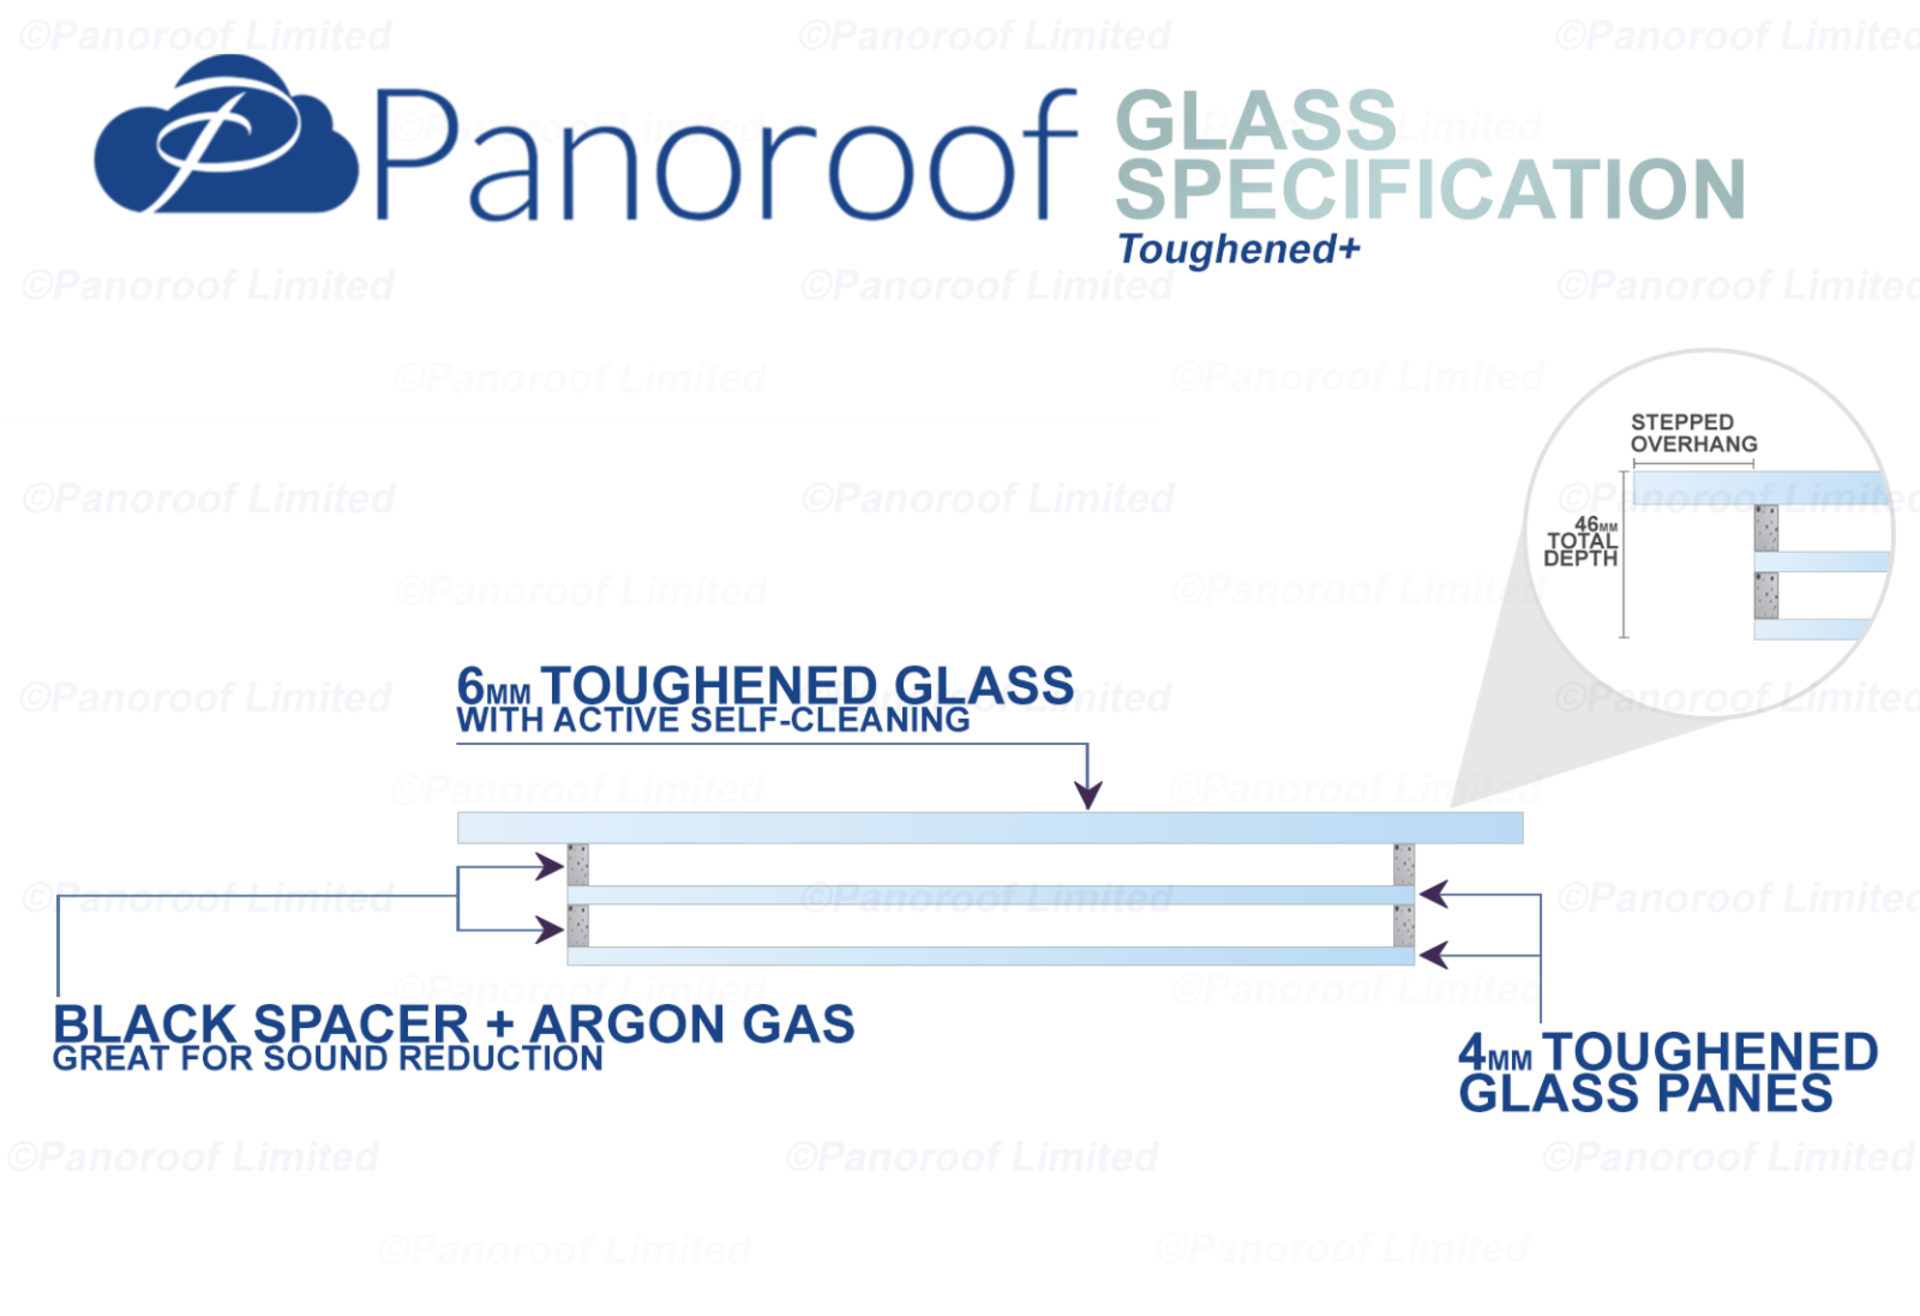 """Panoroof Triple Glazed Self Cleaning 800x1500mm (inside Size Visable glass area) Seamless Glass - Image 4 of 6